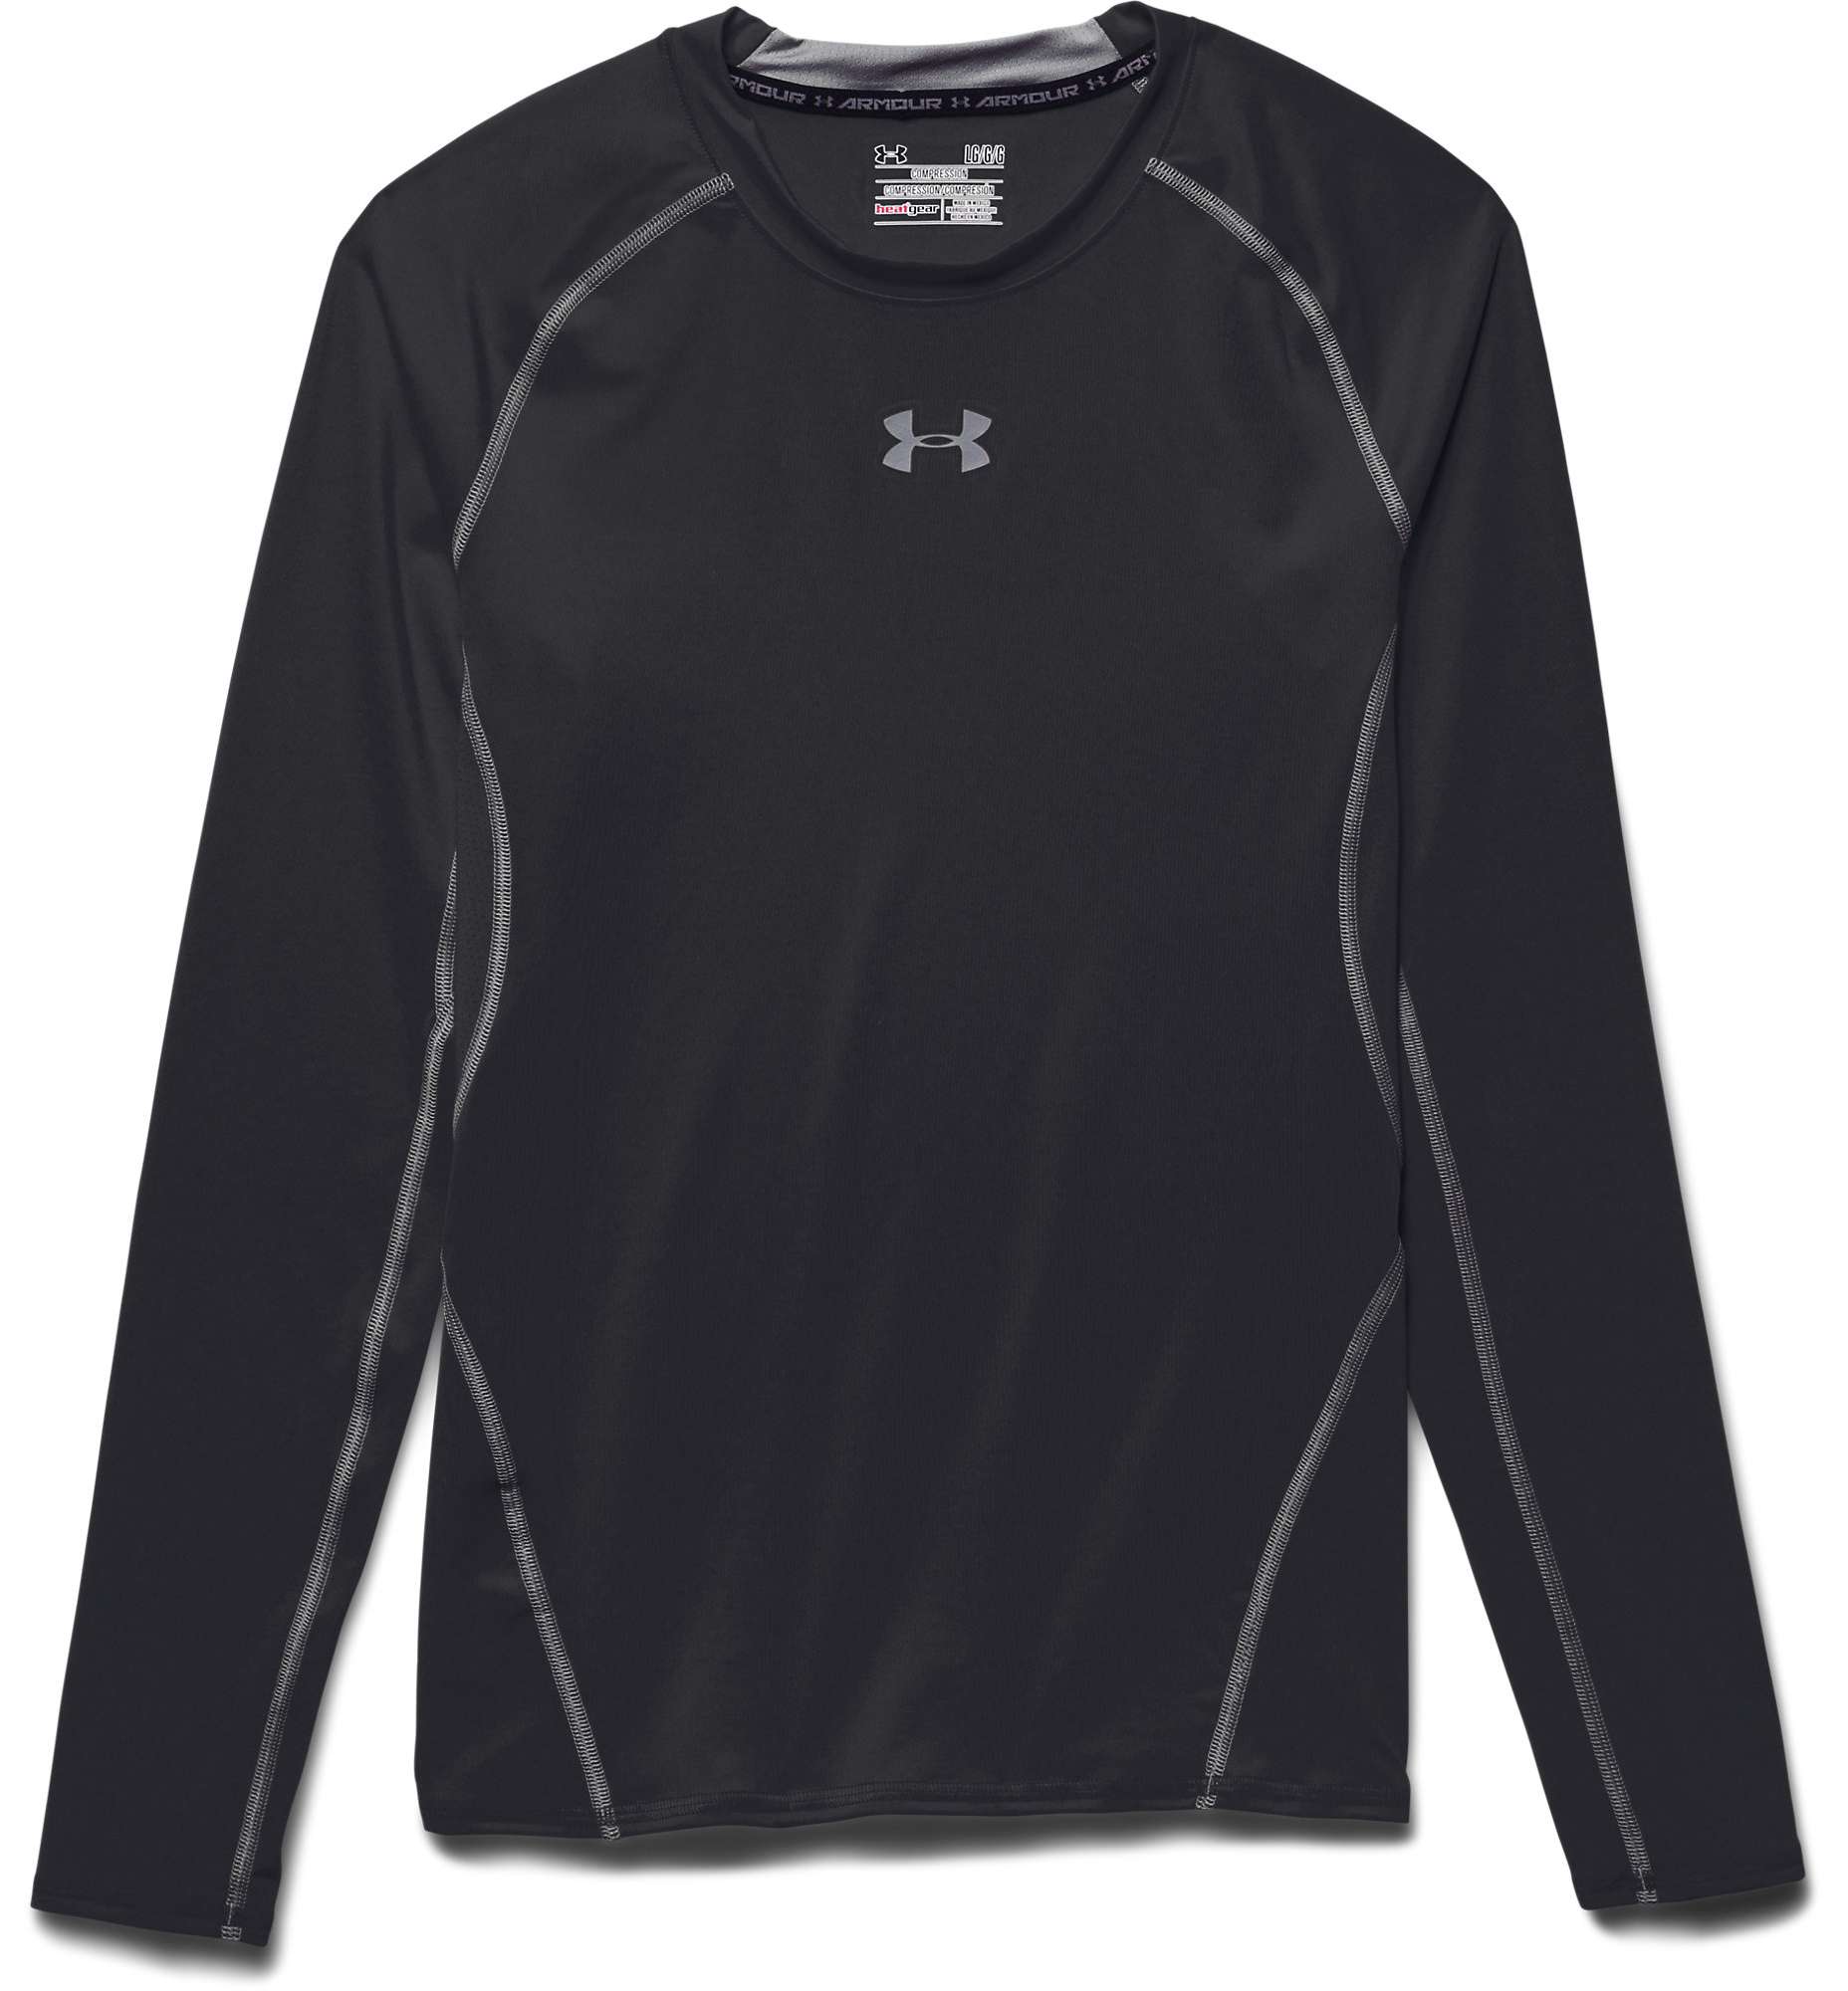 Men's Long Sleeve Compression Tee